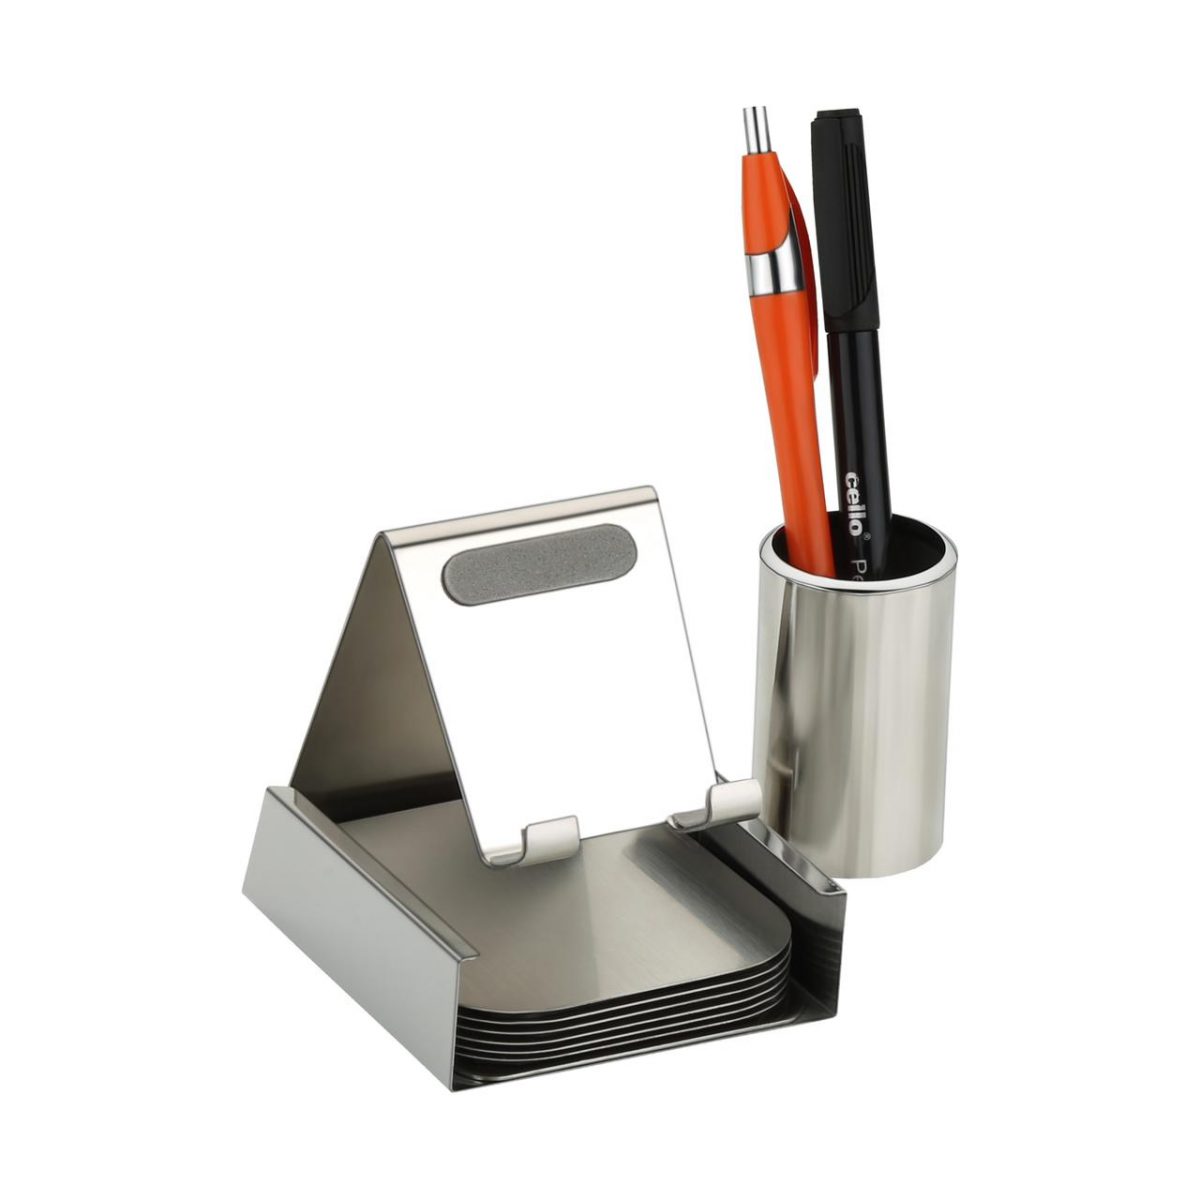 SS mobile stand with pen holder.